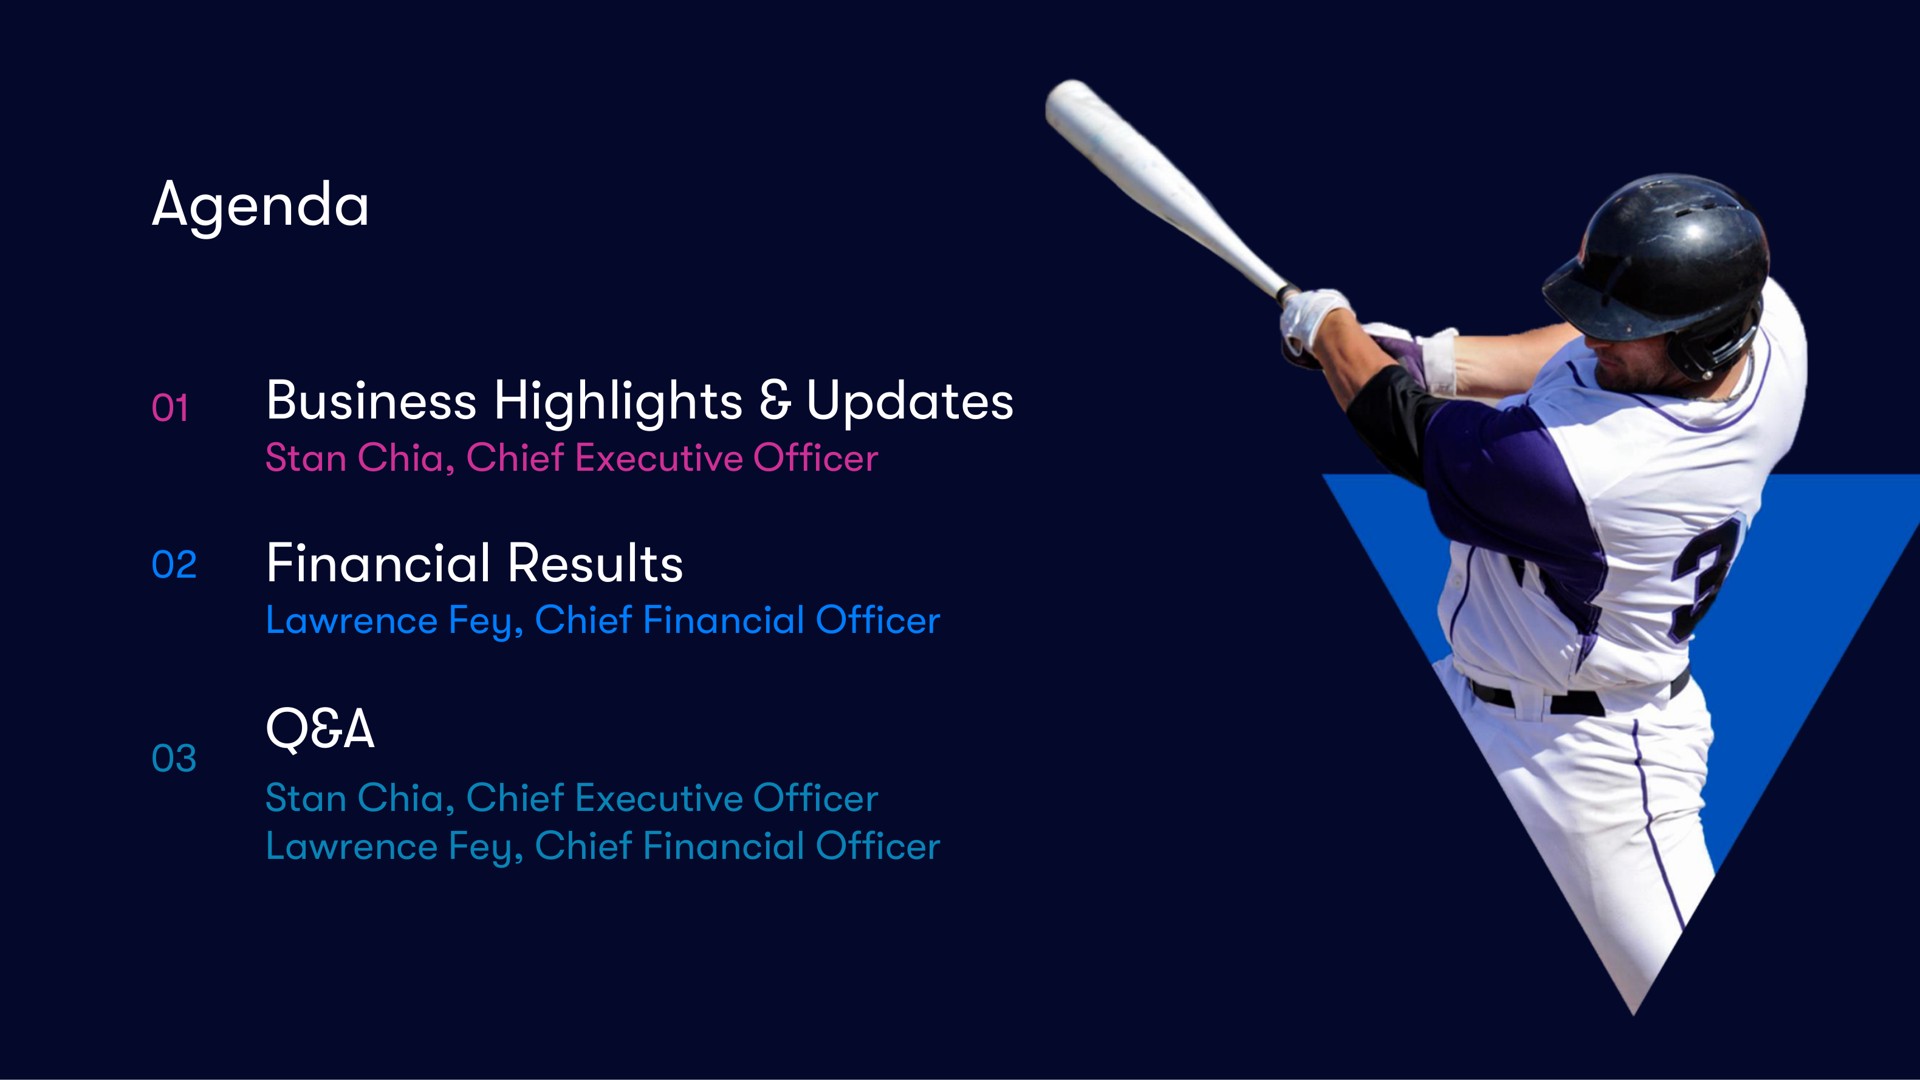 agenda business highlights updates chia chief executive officer financial results fey chief financial officer a chia chief executive officer fey chief financial officer | Vivid Seats